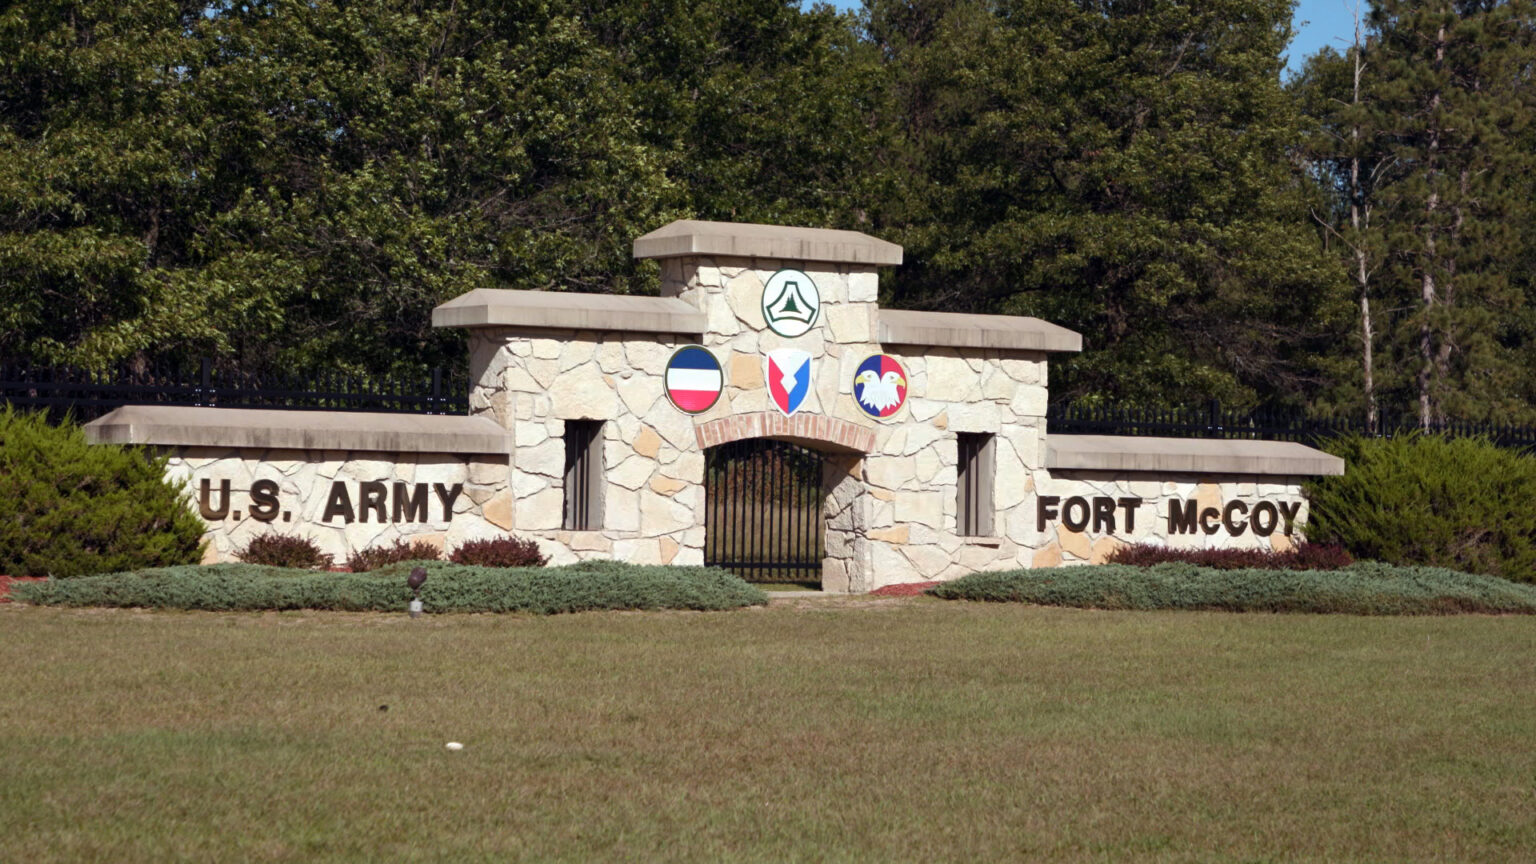 A stone gate marks the entrance to the U.S. Army installation Fort McCoy.